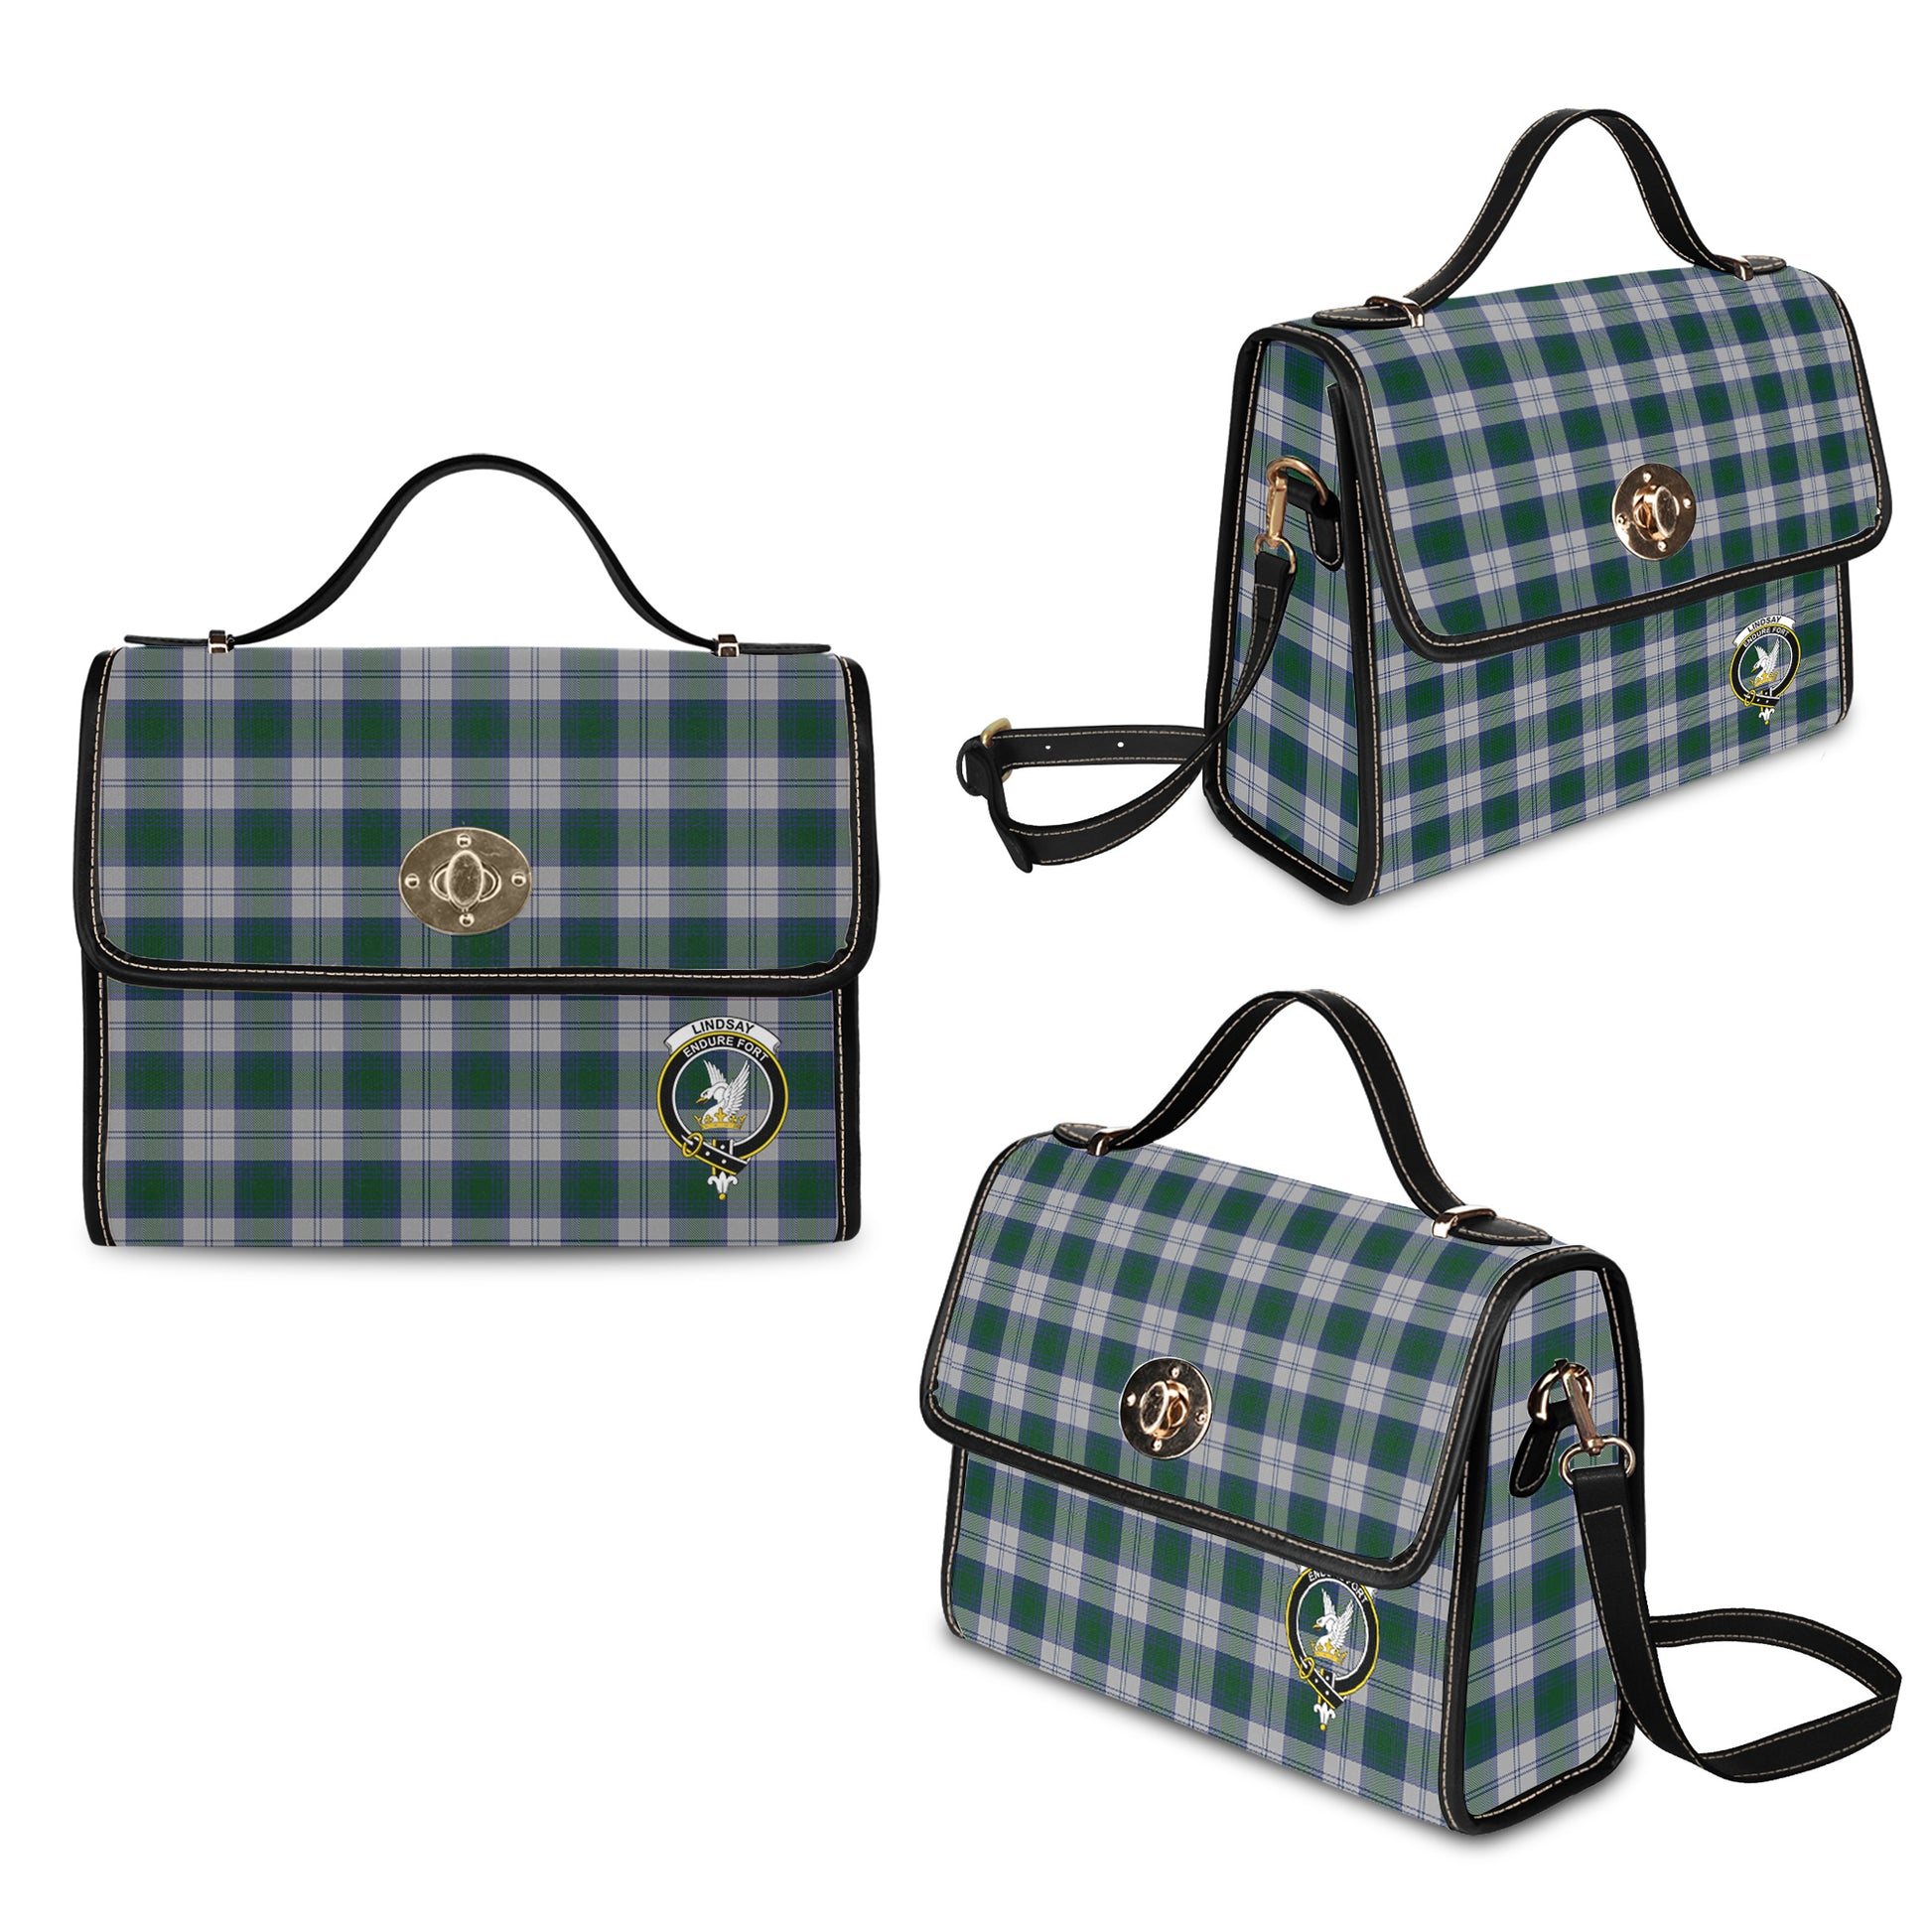 lindsay-dress-tartan-leather-strap-waterproof-canvas-bag-with-family-crest